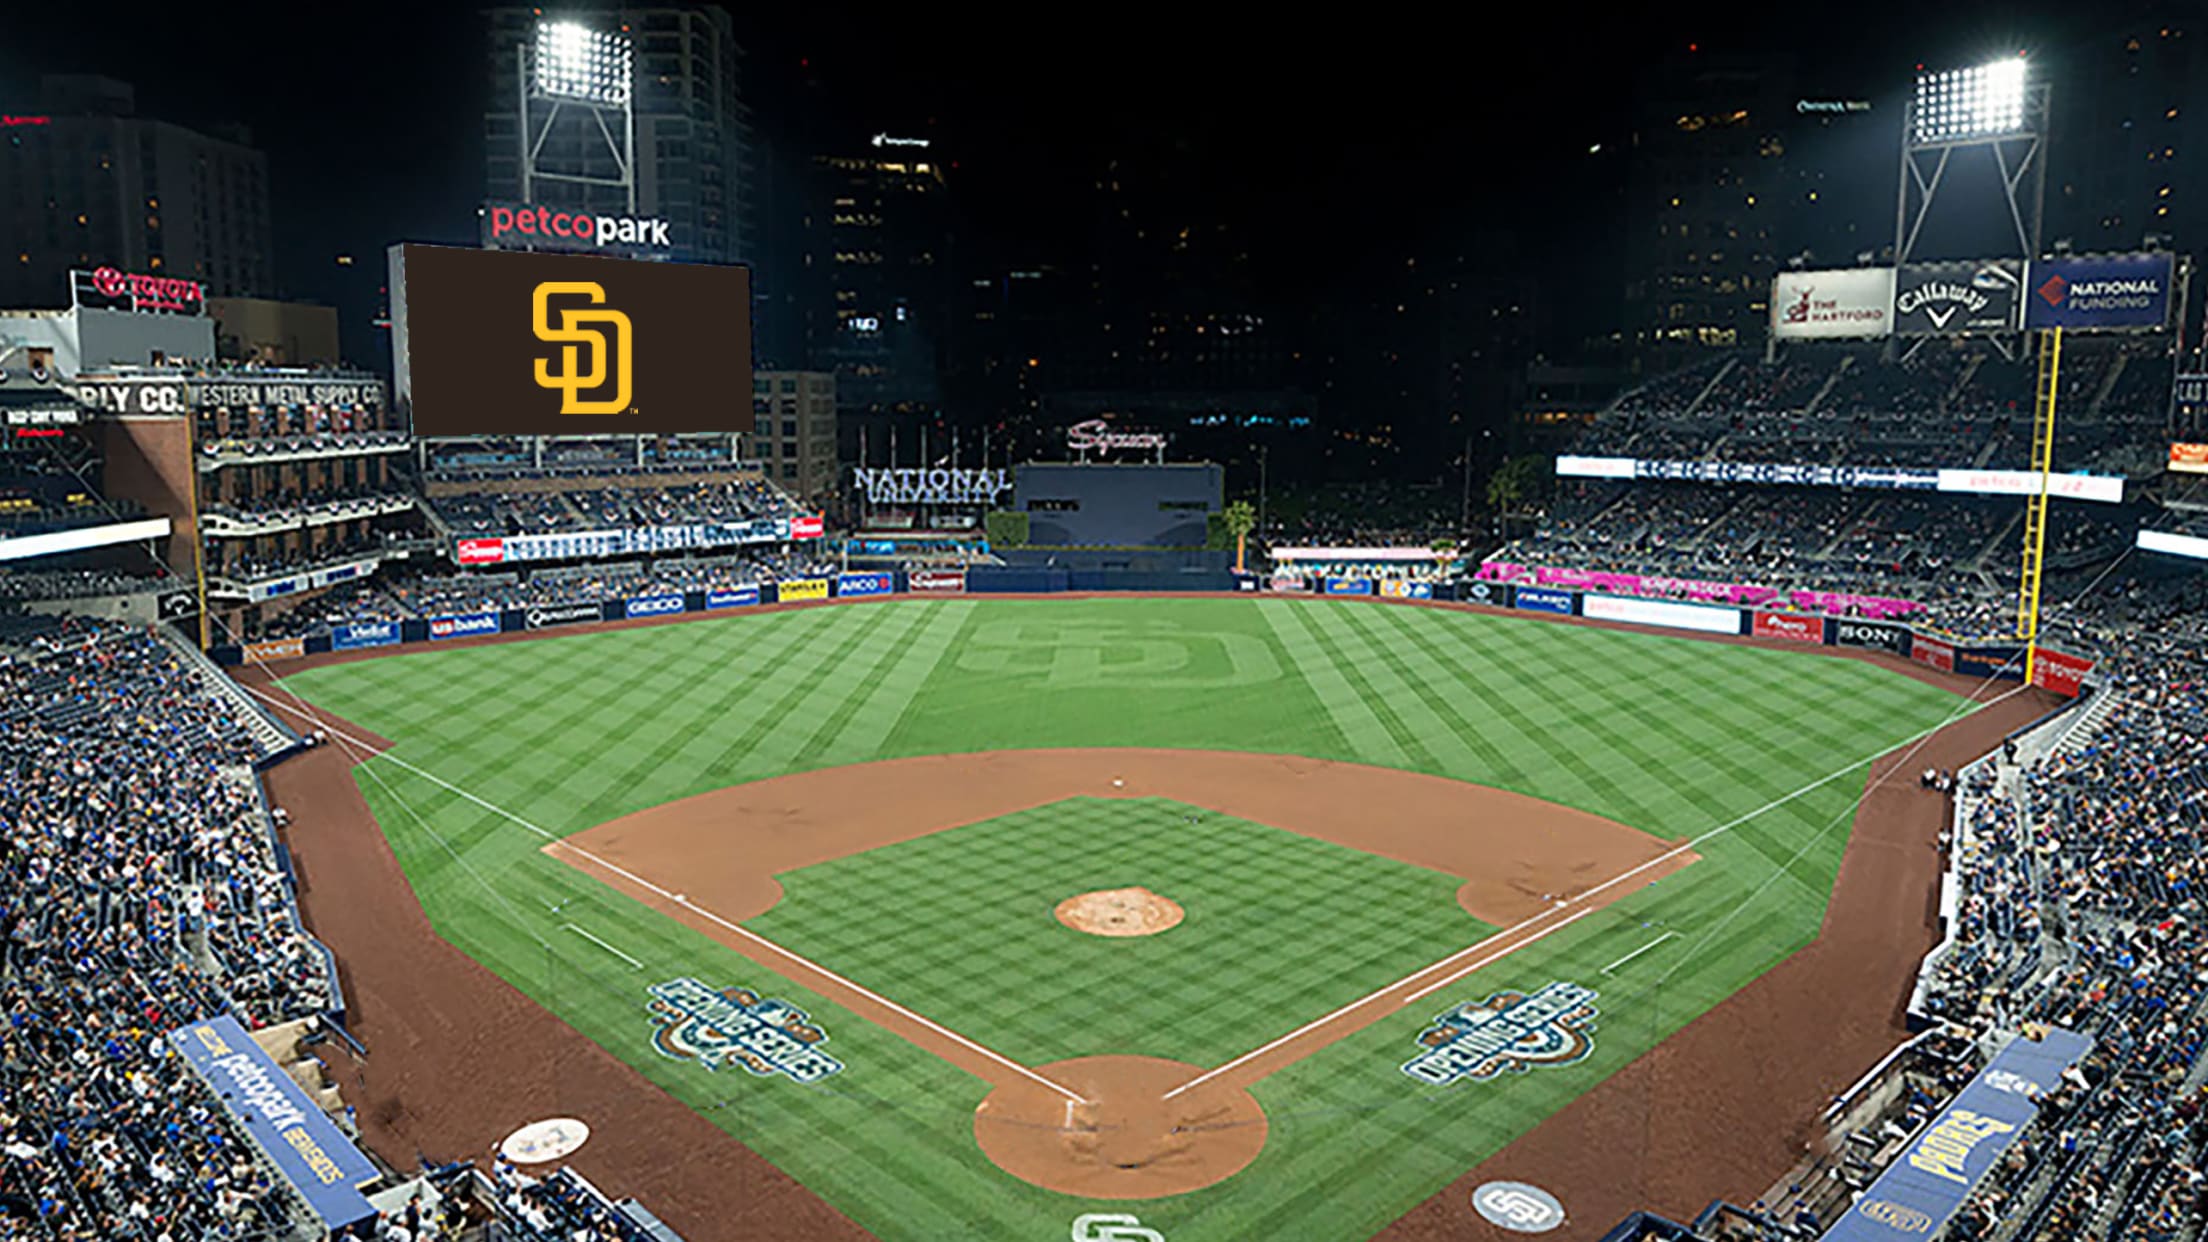 Petco Park (San Diego) – Society for American Baseball Research